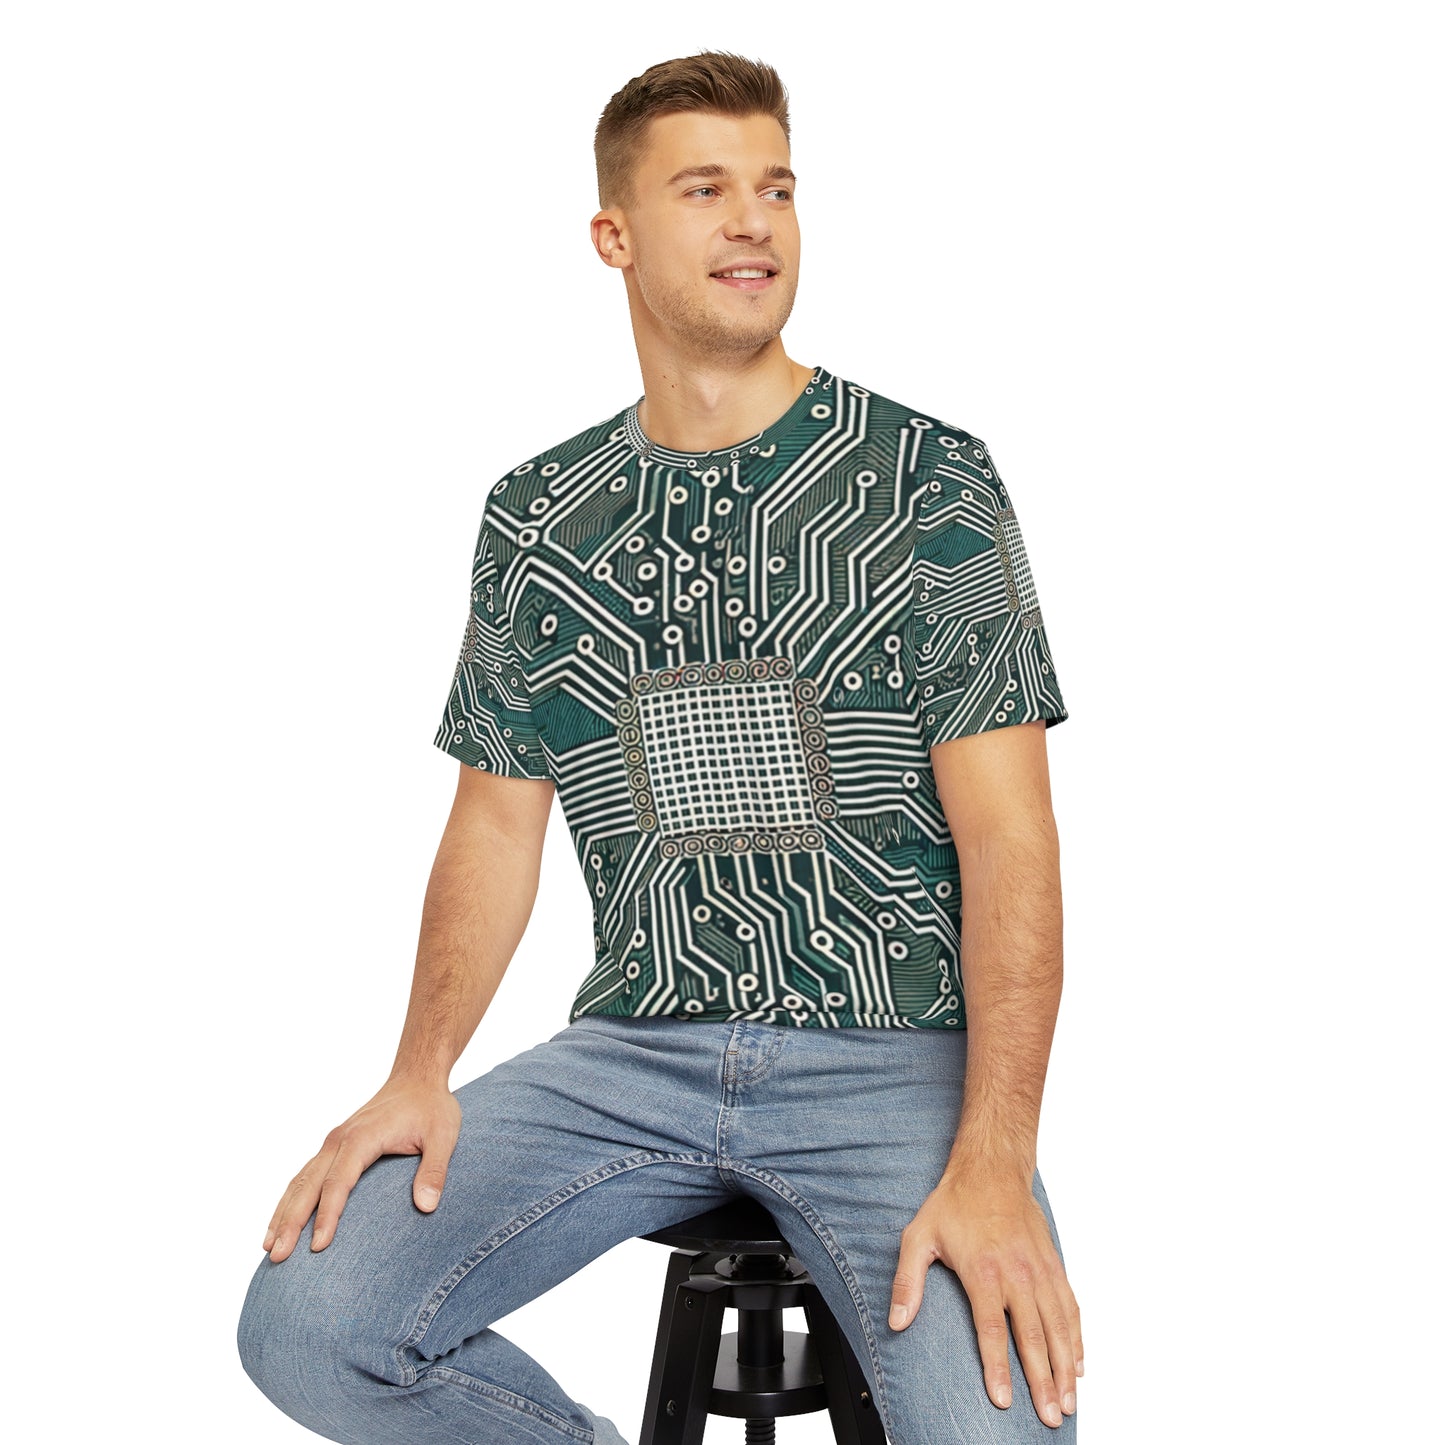 Front view of the Circuit Symmetry Matrix Crewneck Pullover All-Over Print Short-Sleeved Shirt green gray black beige circuit pattern paired with casual denim pants worn by a white man sitting on a stool chair 